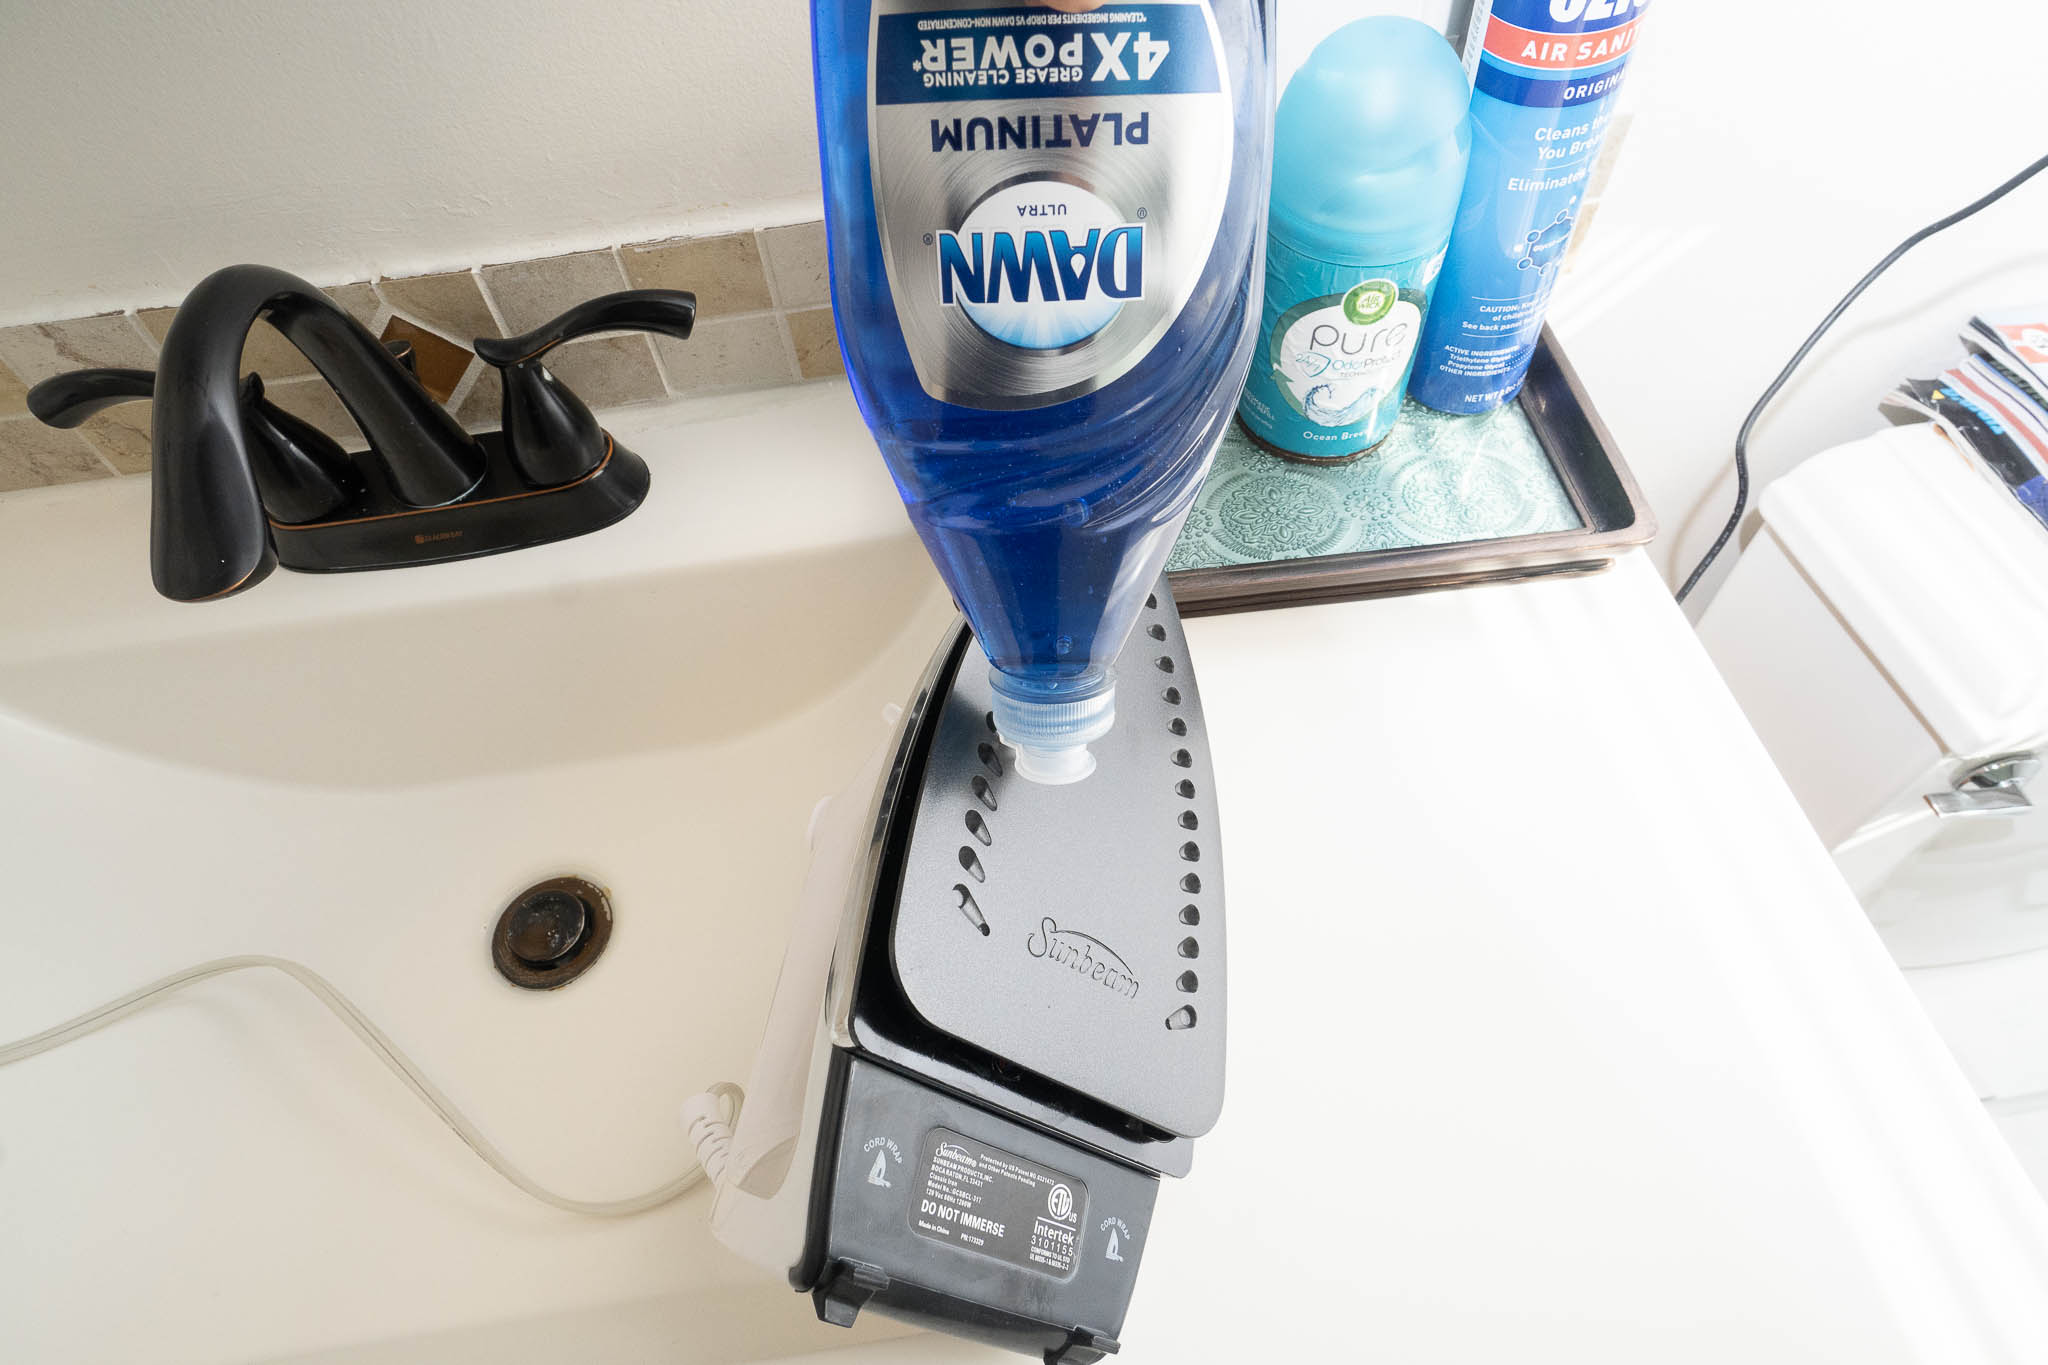 cleaning iron with dawn dish soap